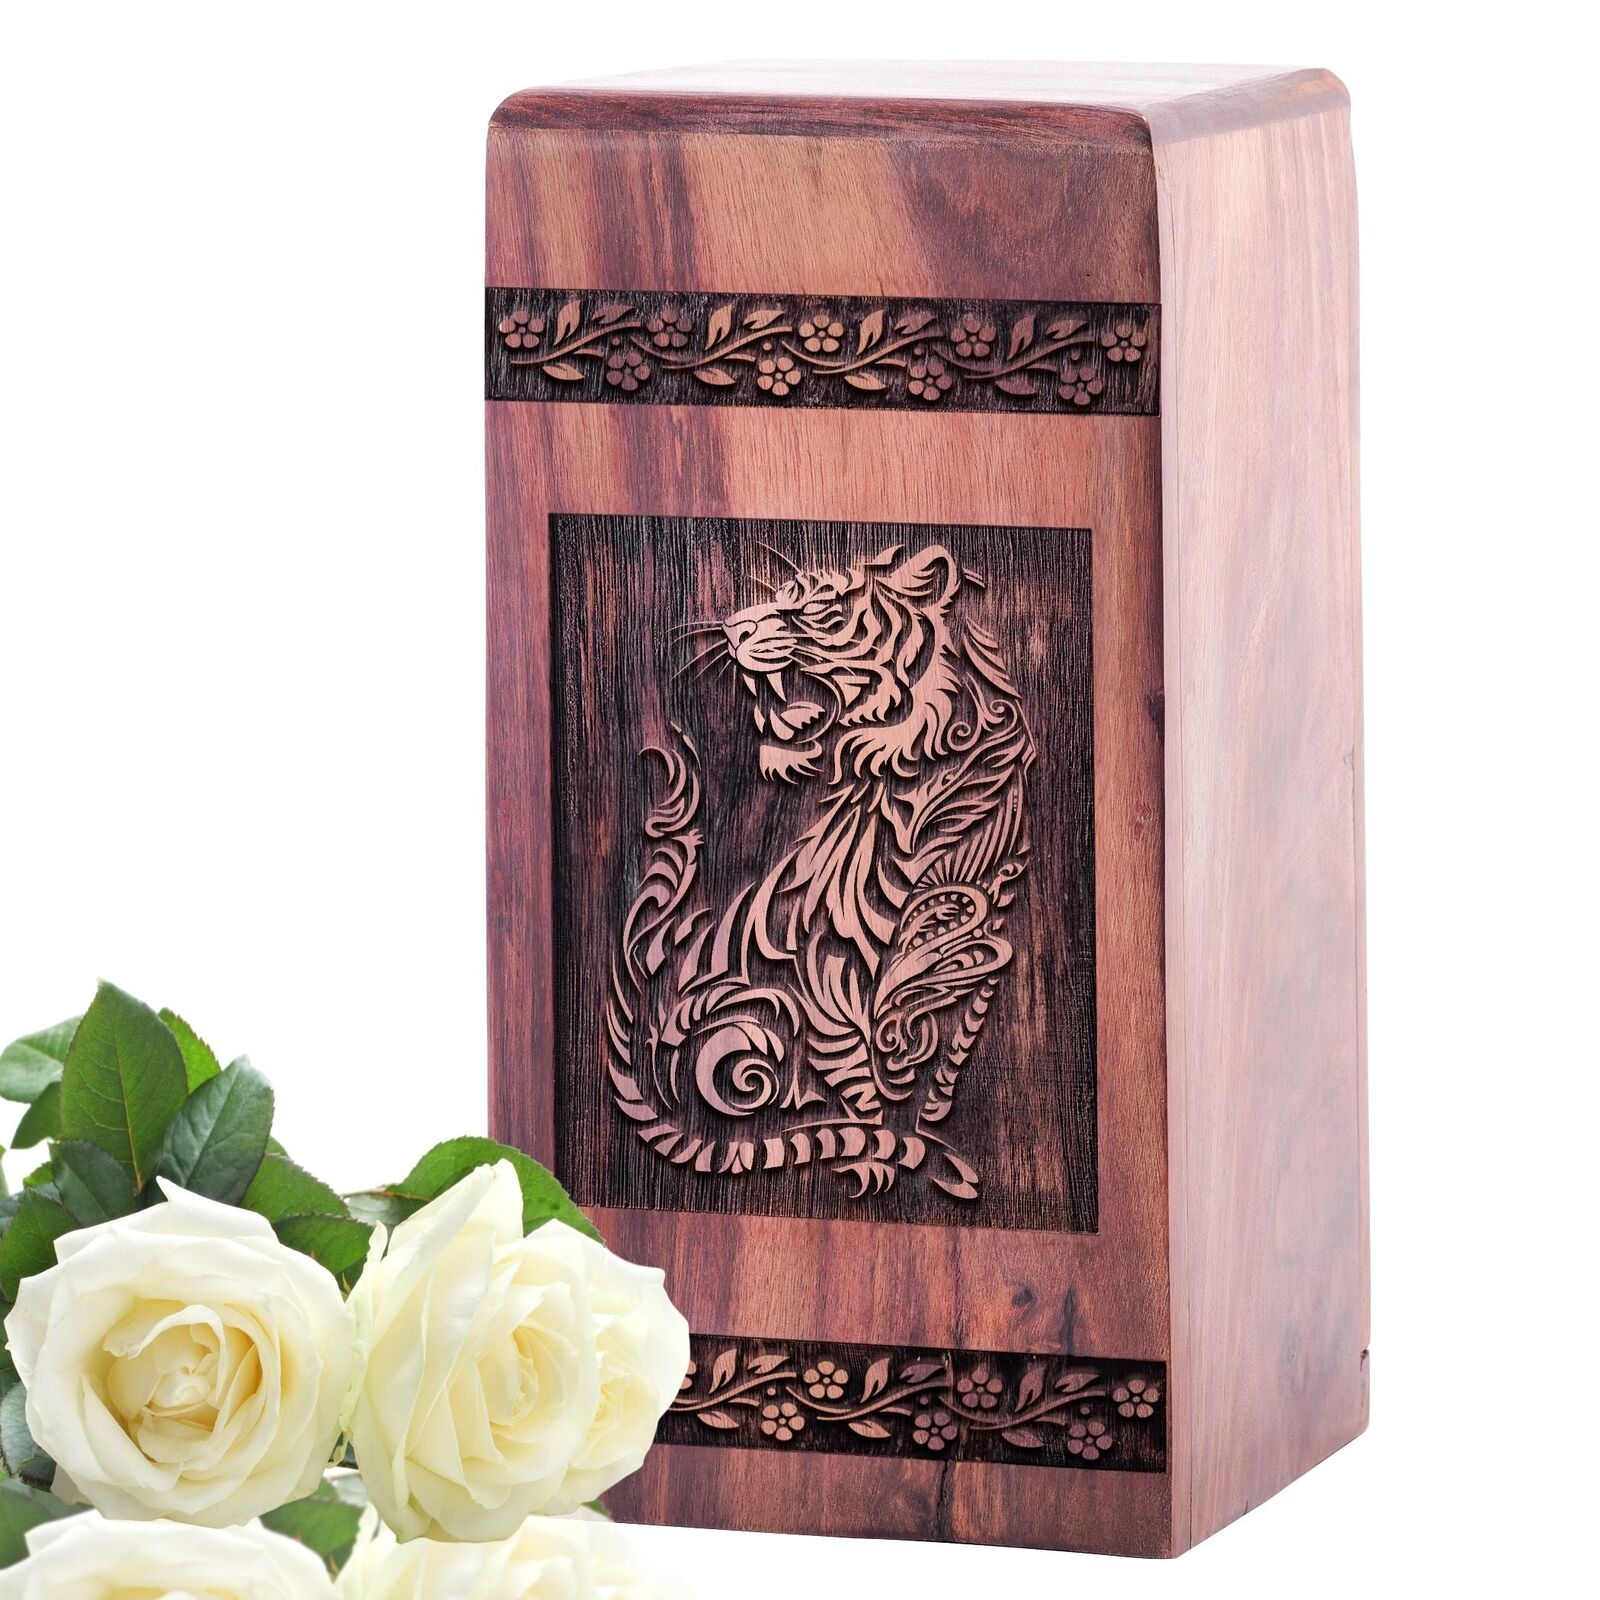 Tiger Wood Cremation Urns for Adults & Seniors